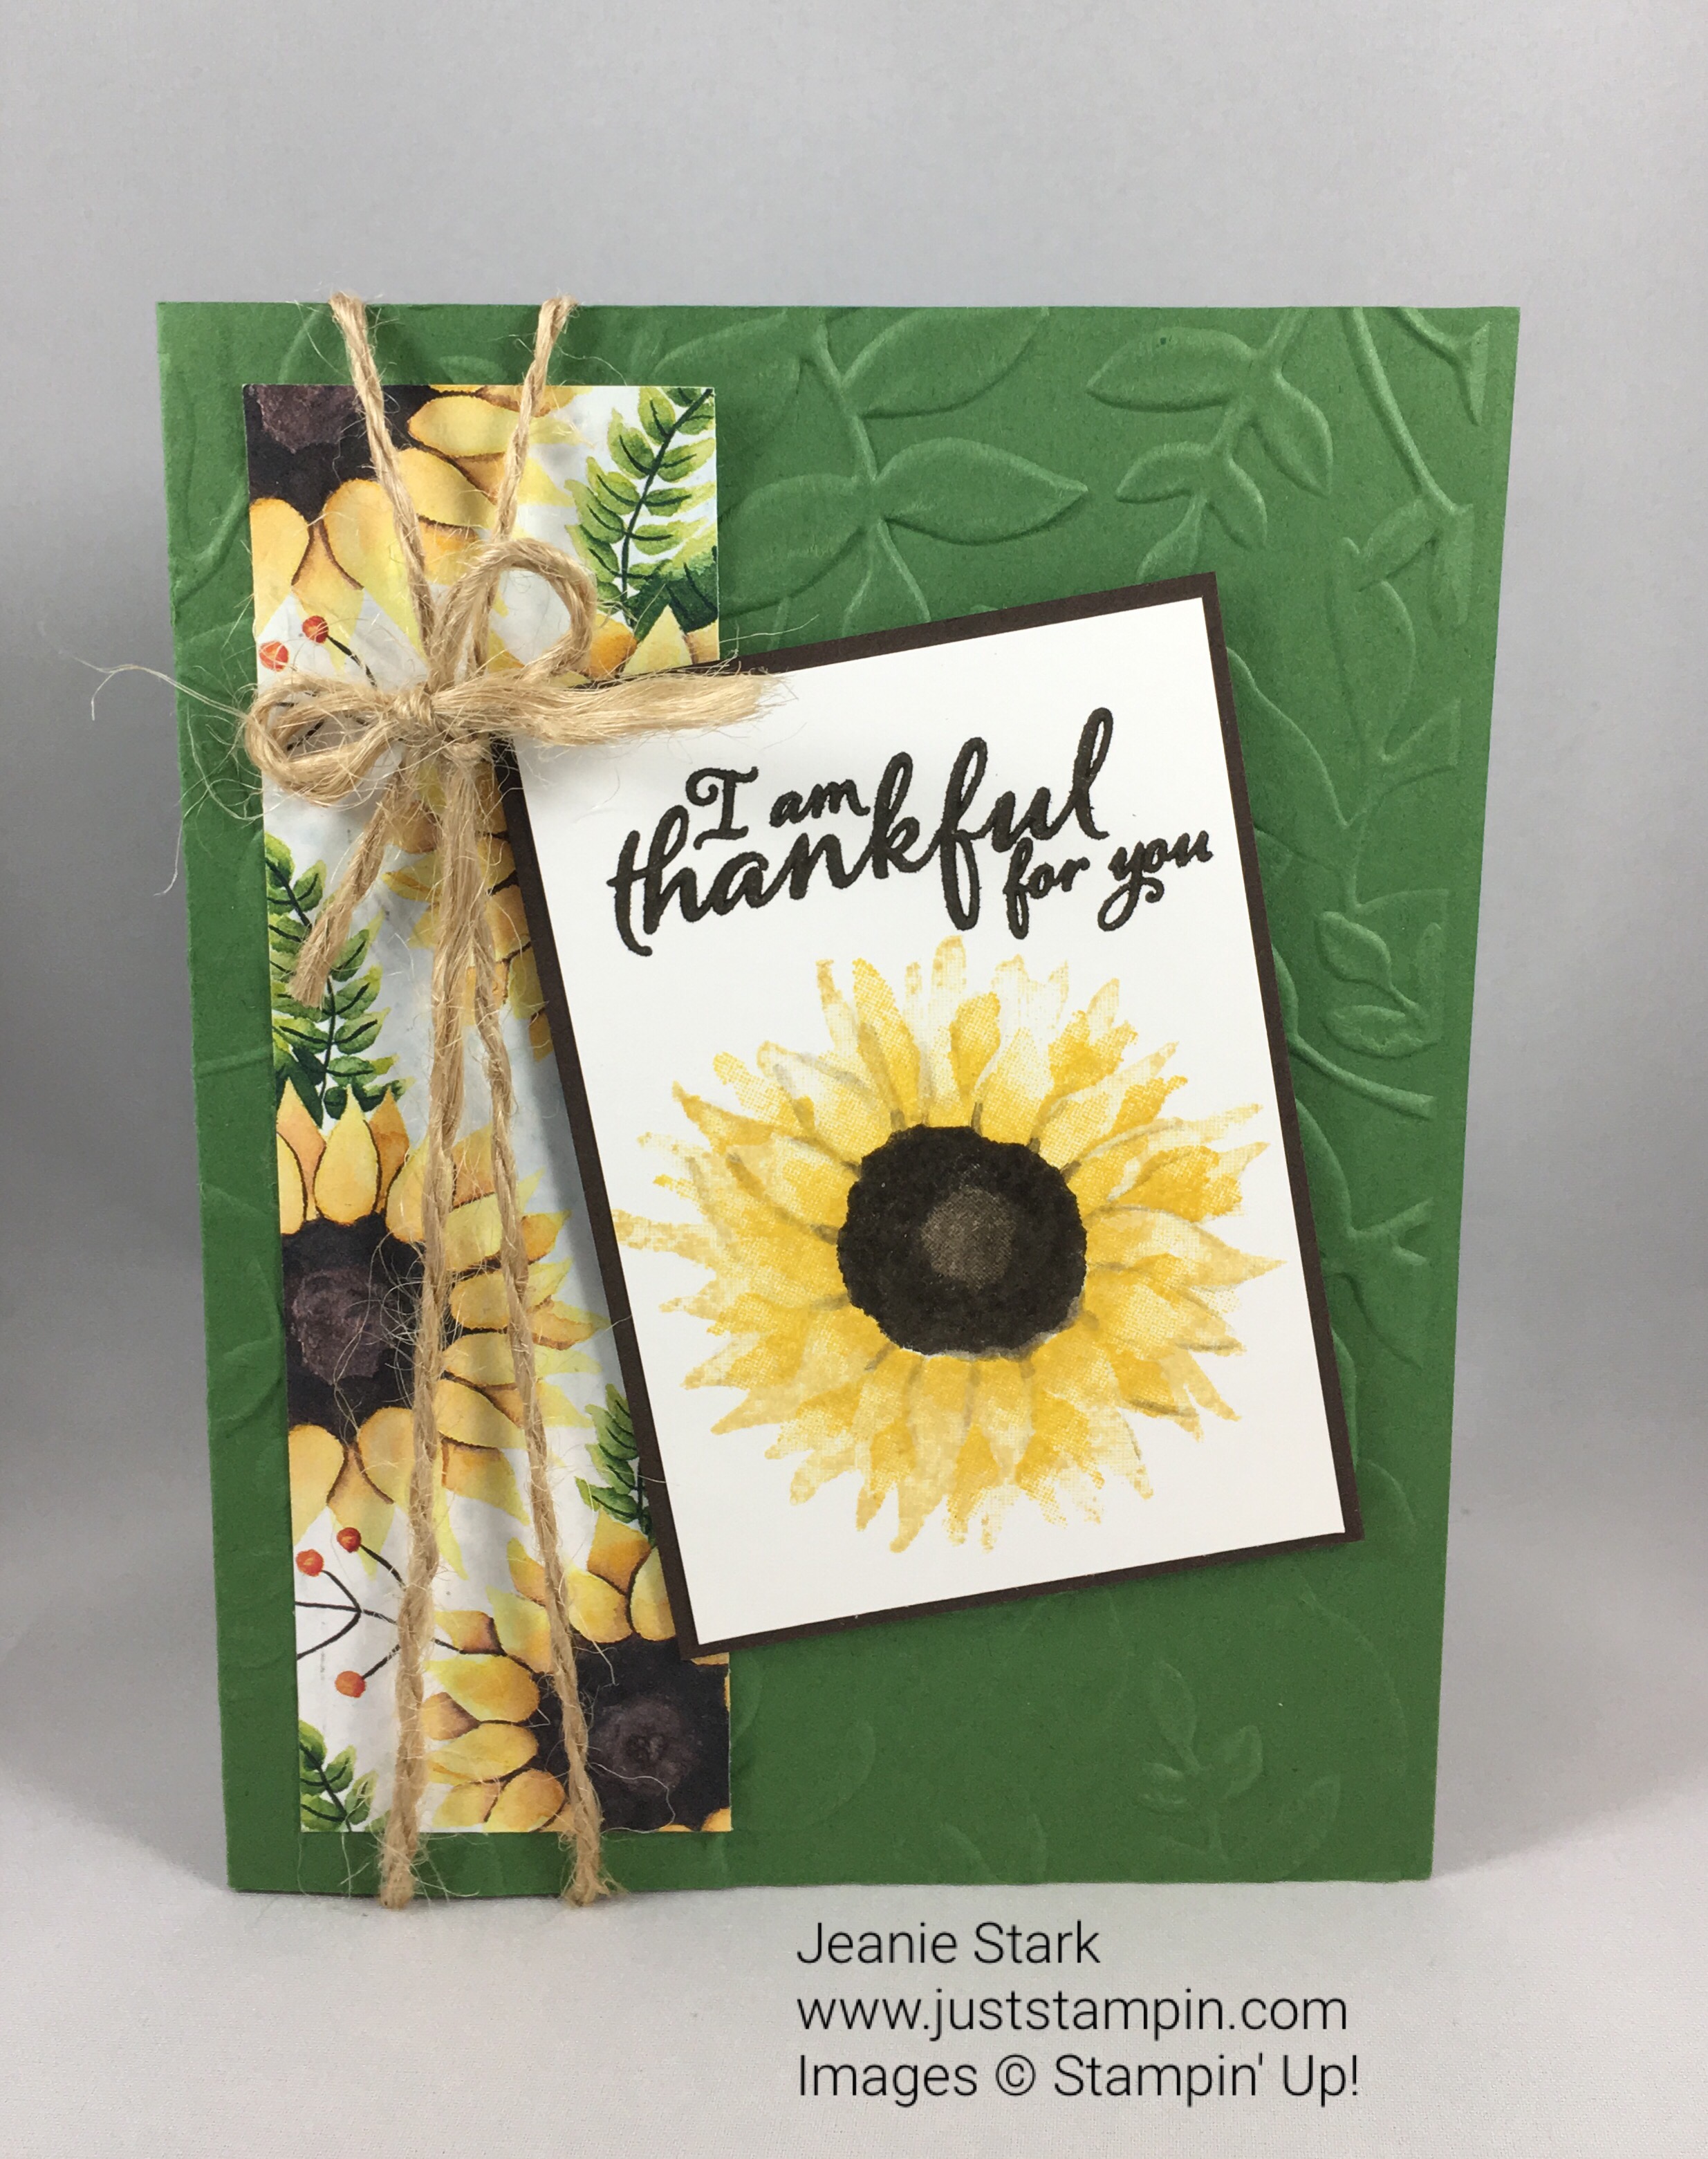 Stampin Up sunflower made with Painted Harvest Stamp Set and Layered Leaves Embossing Folder. For inspiration, directions, and more visit www.juststampin.com